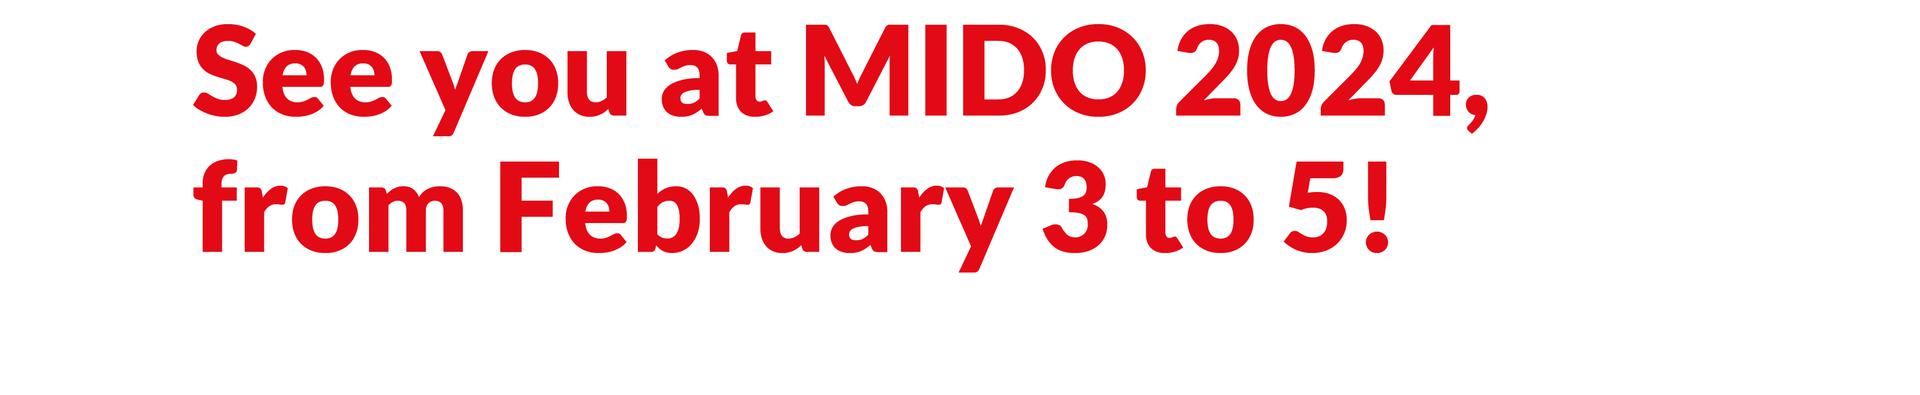 See you at MIDO 2024, from February 3 to 5!